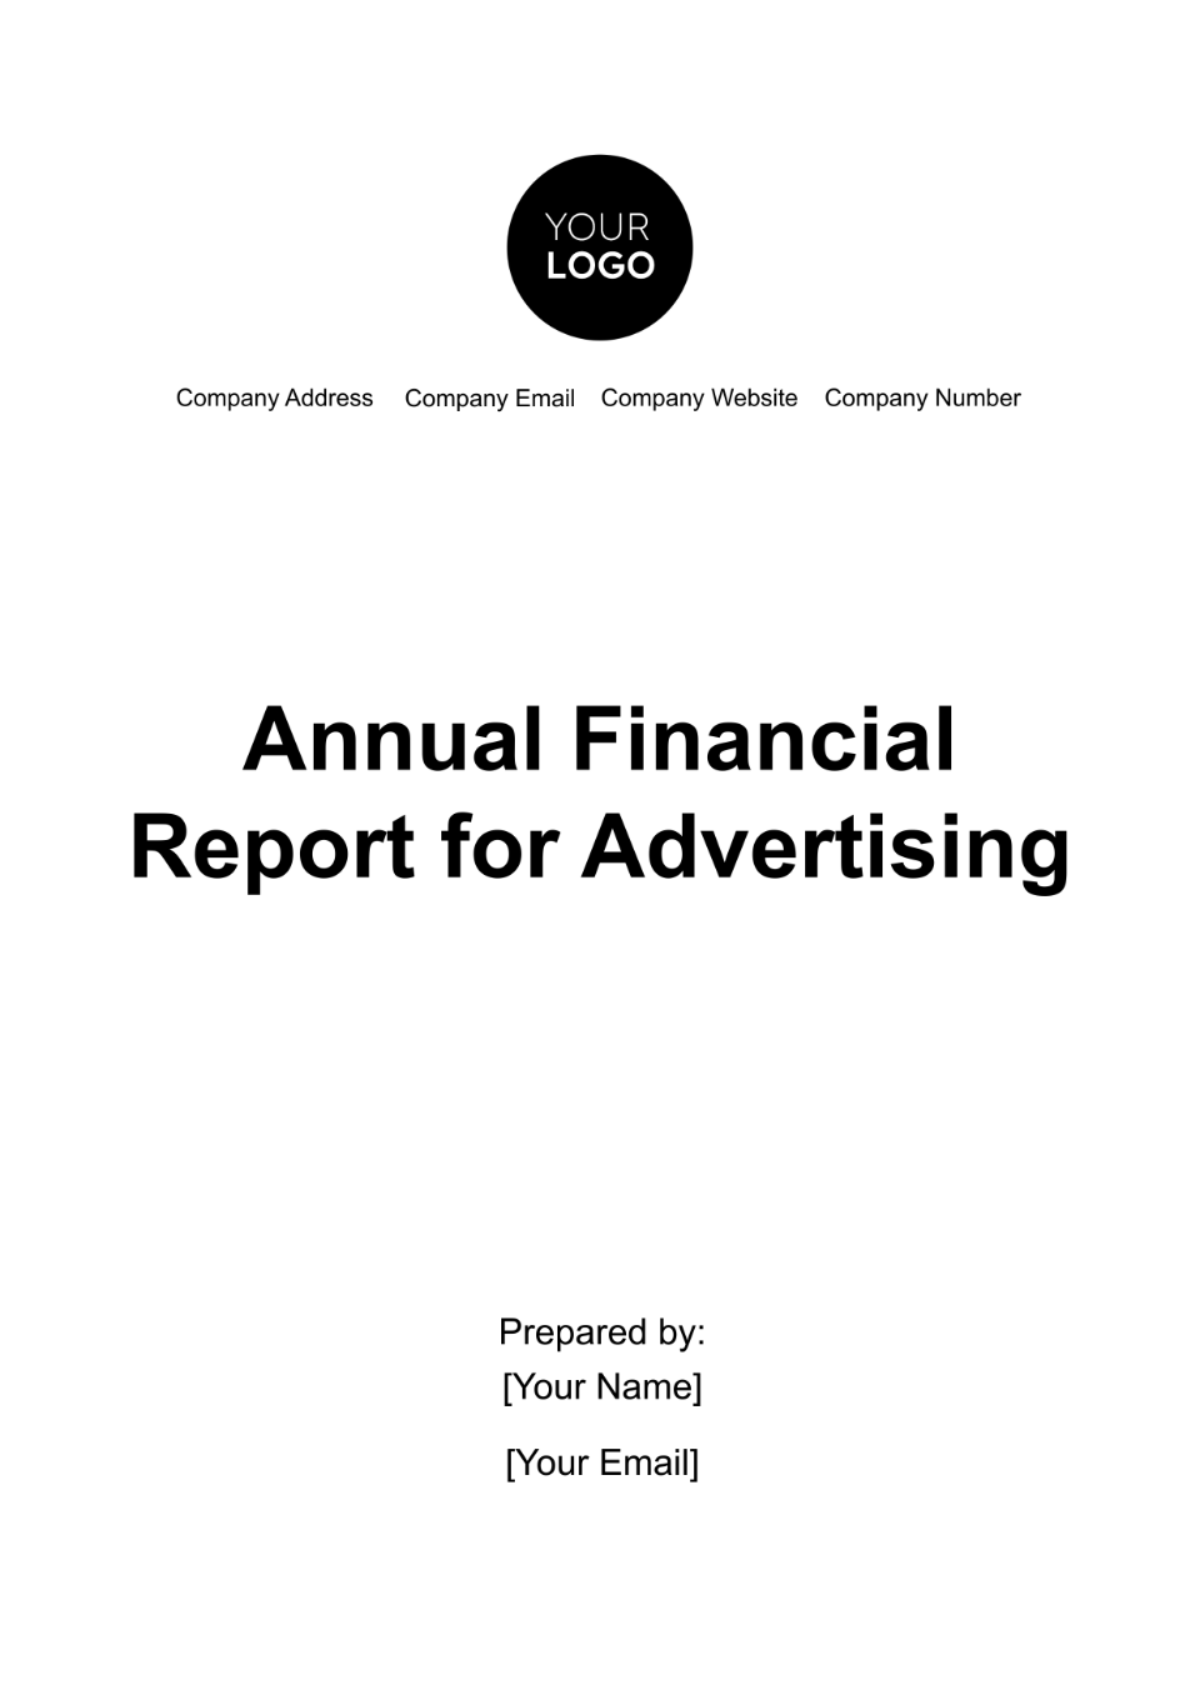 Annual Financial Report for Advertising Template